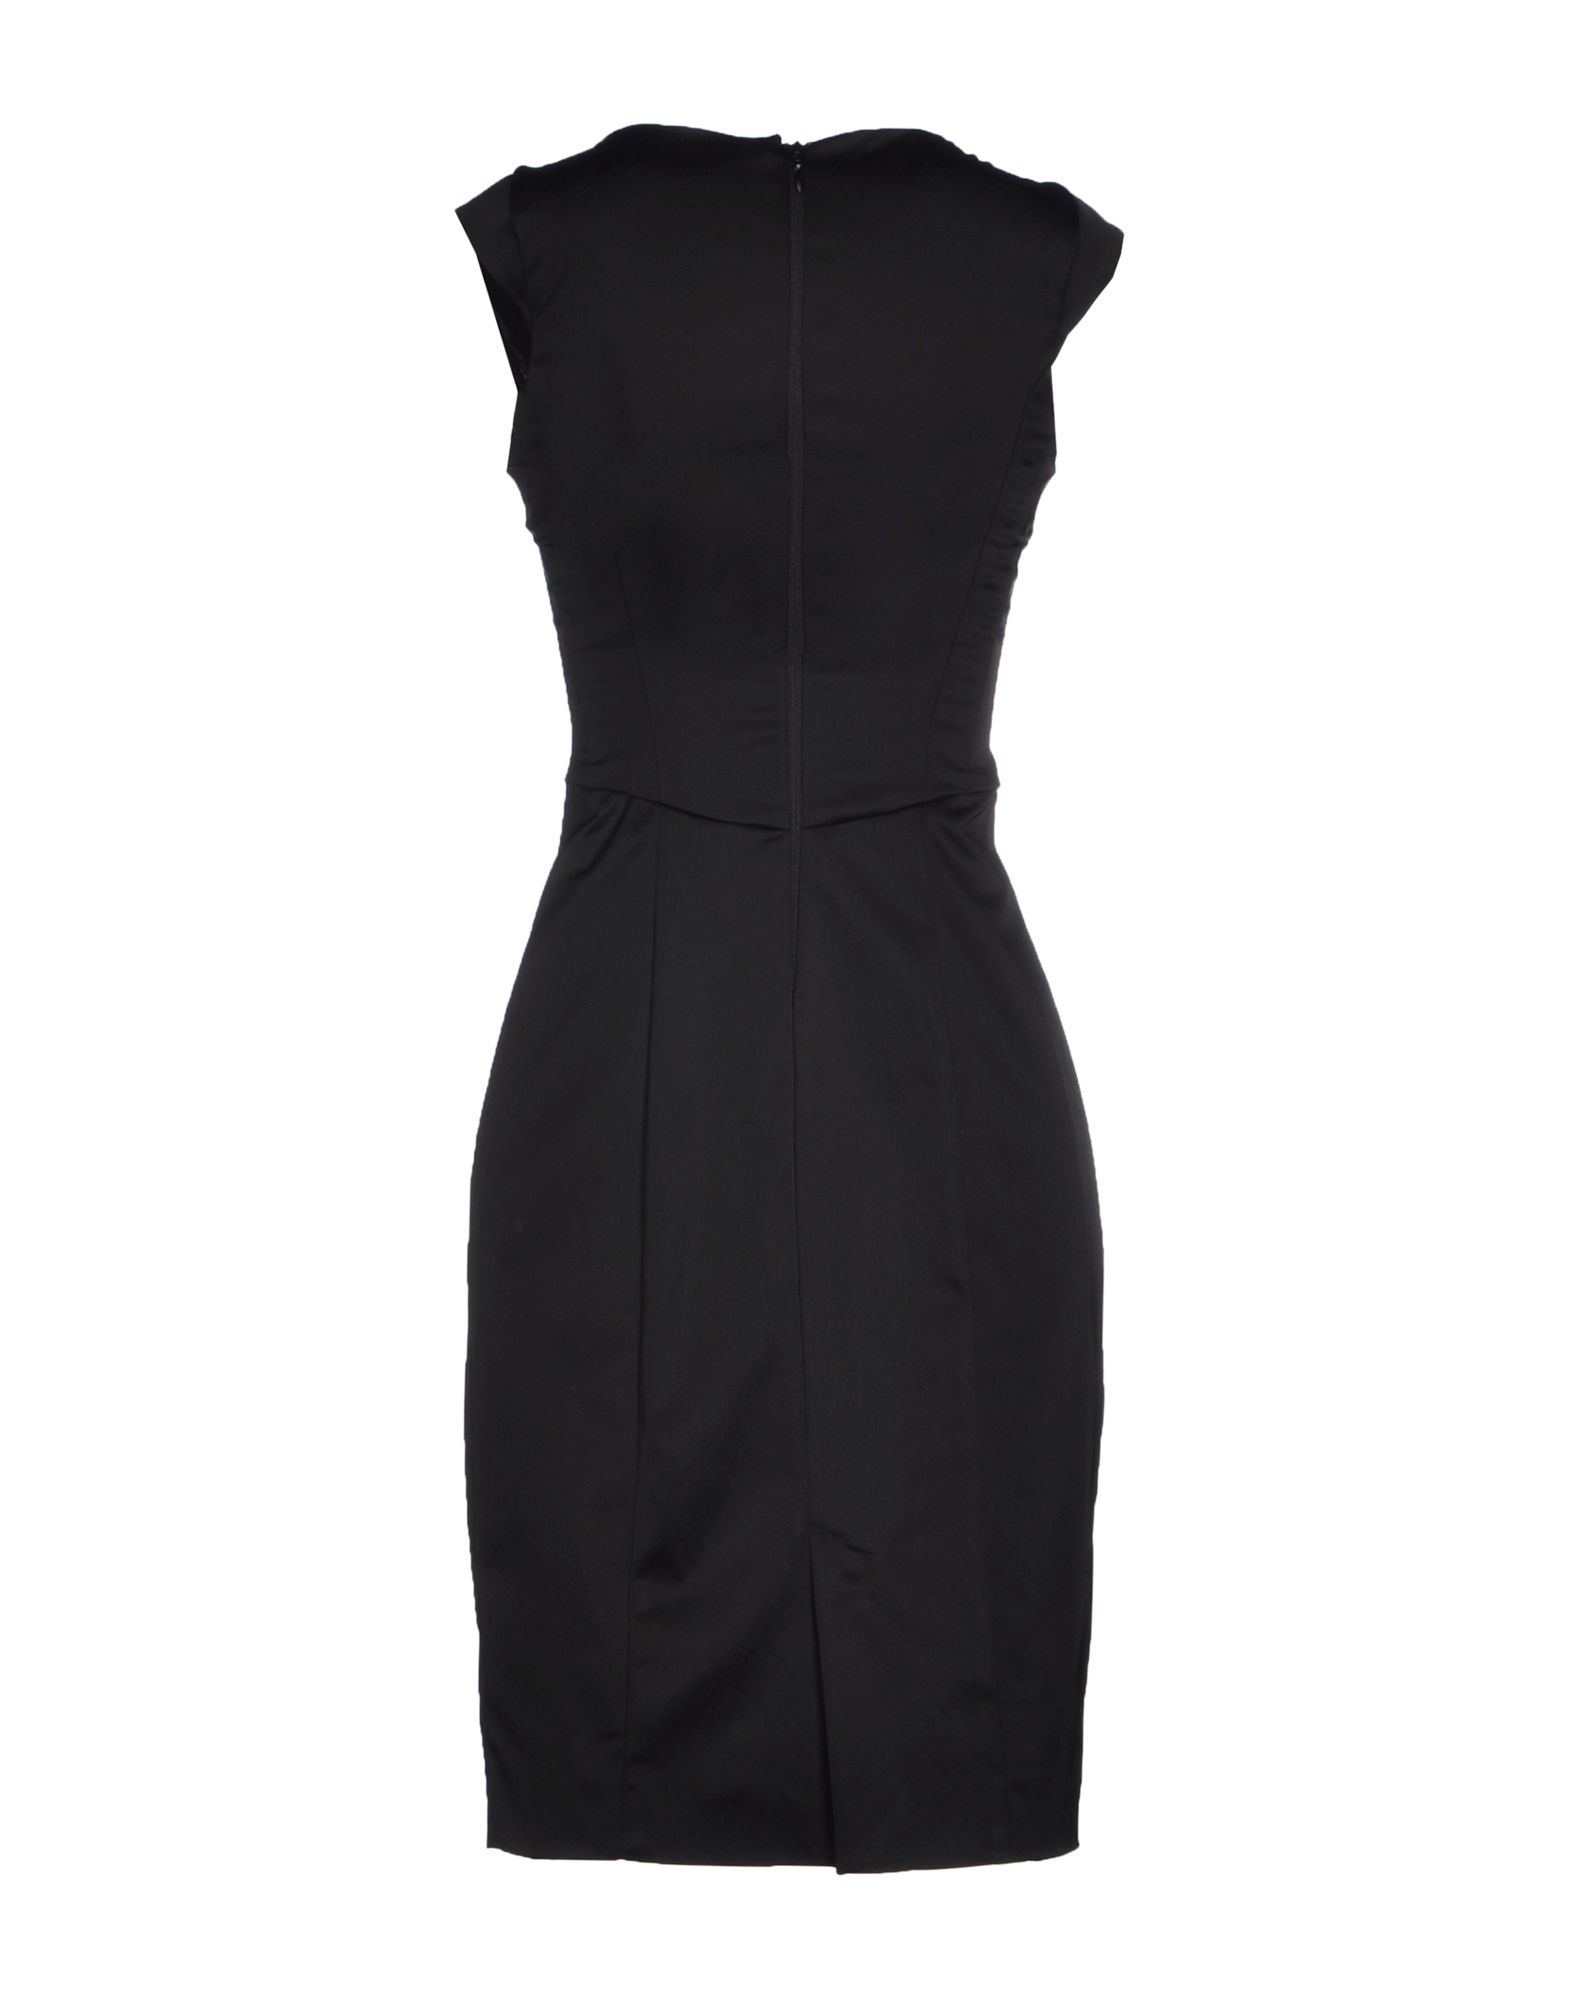 Guess By Marciano Knee-Length Dress in Black | Lyst